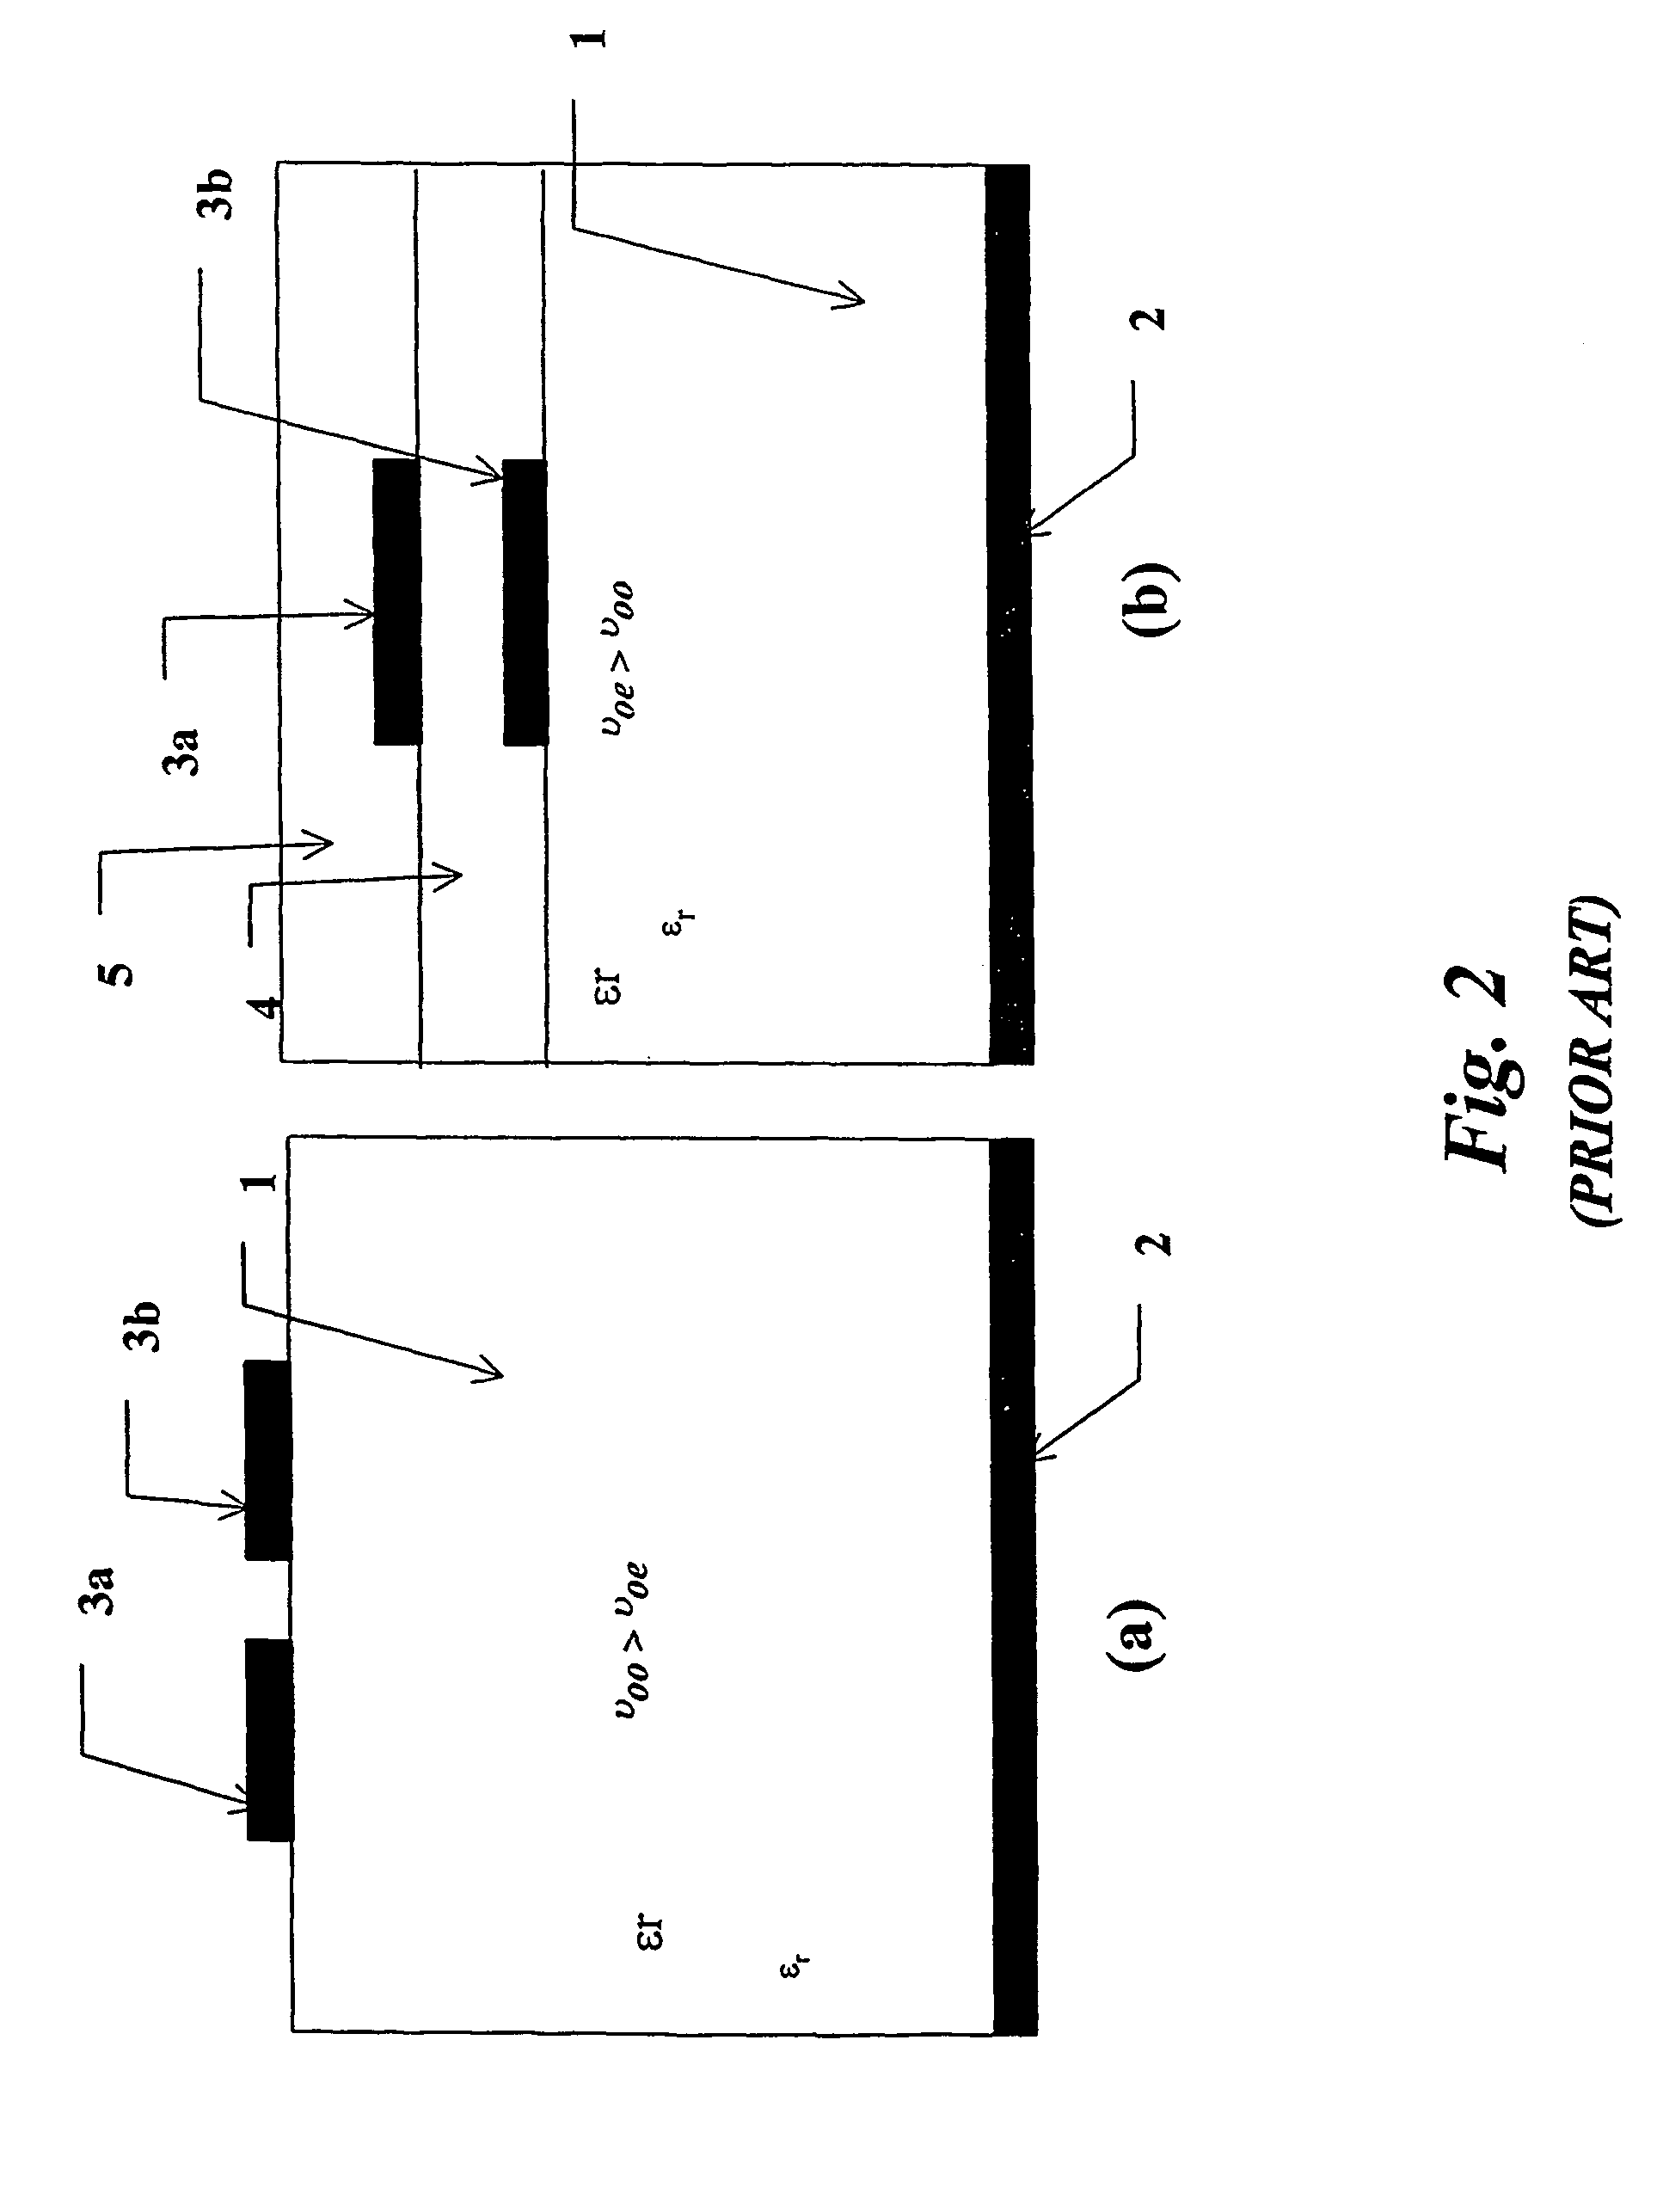 Coupling device using buried capacitors in multilayered substrate